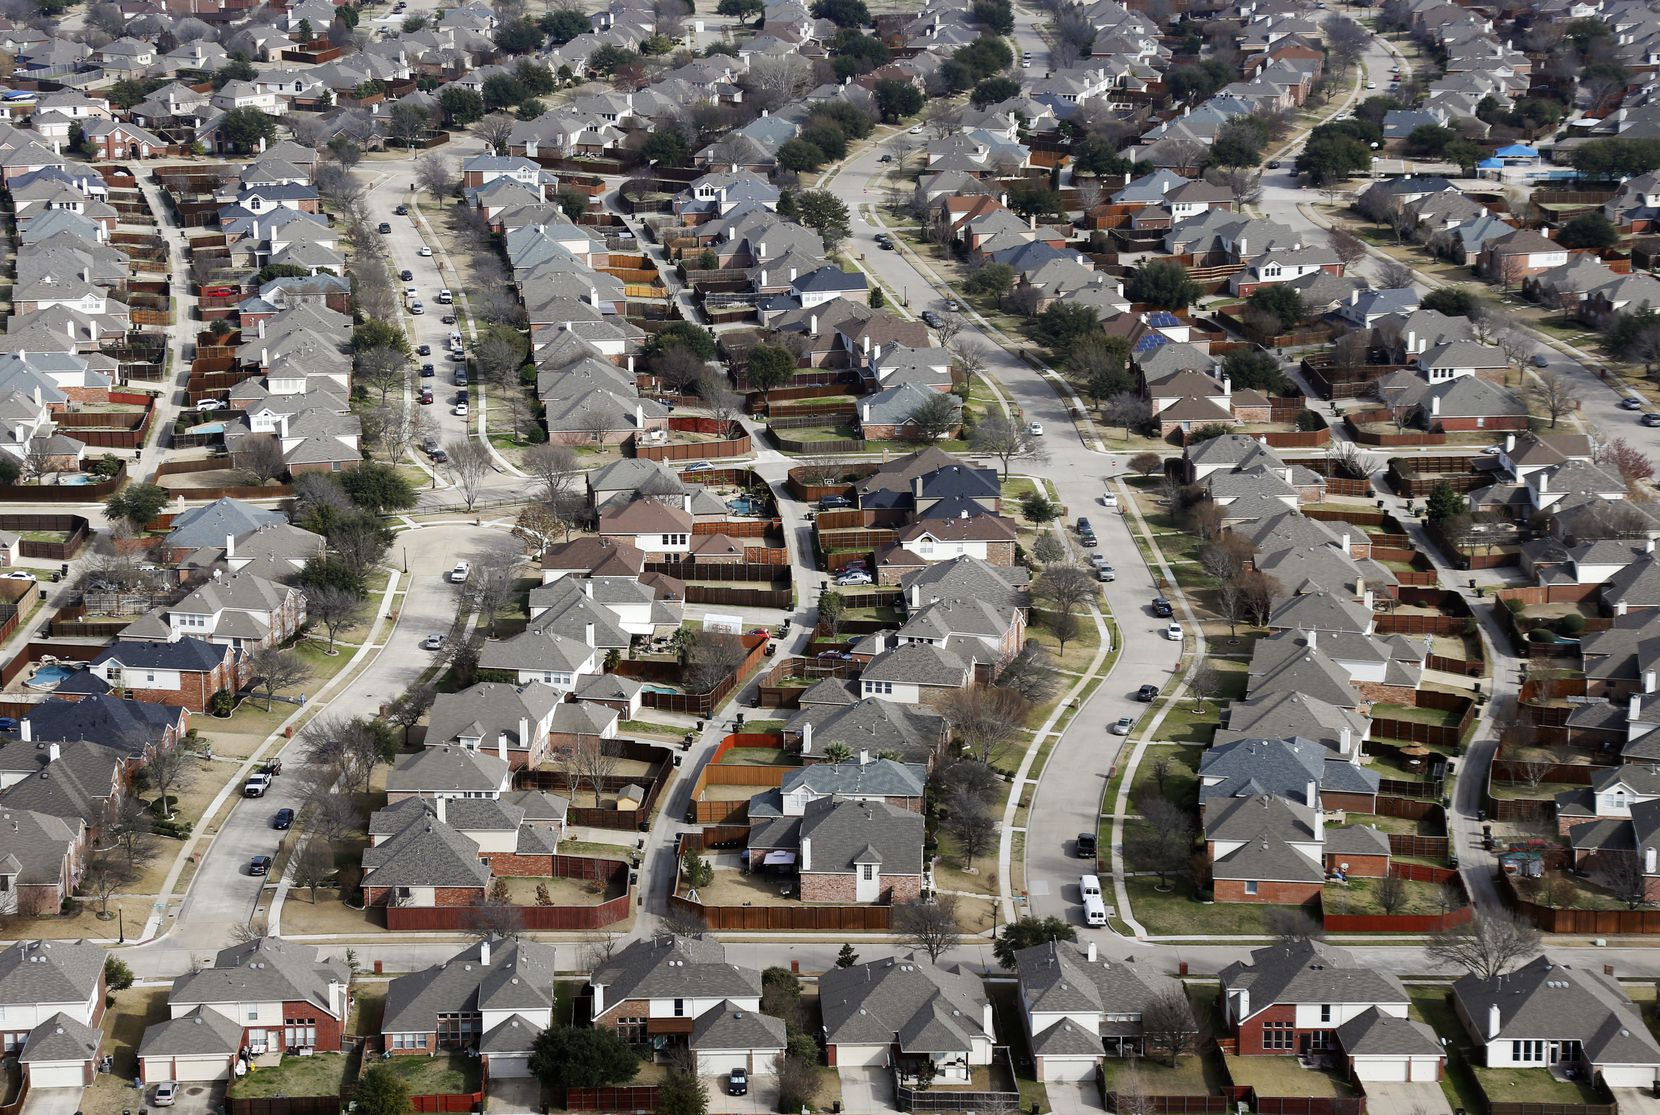 Builders have started more than 3,000 rental houses in the D-FW area this year.